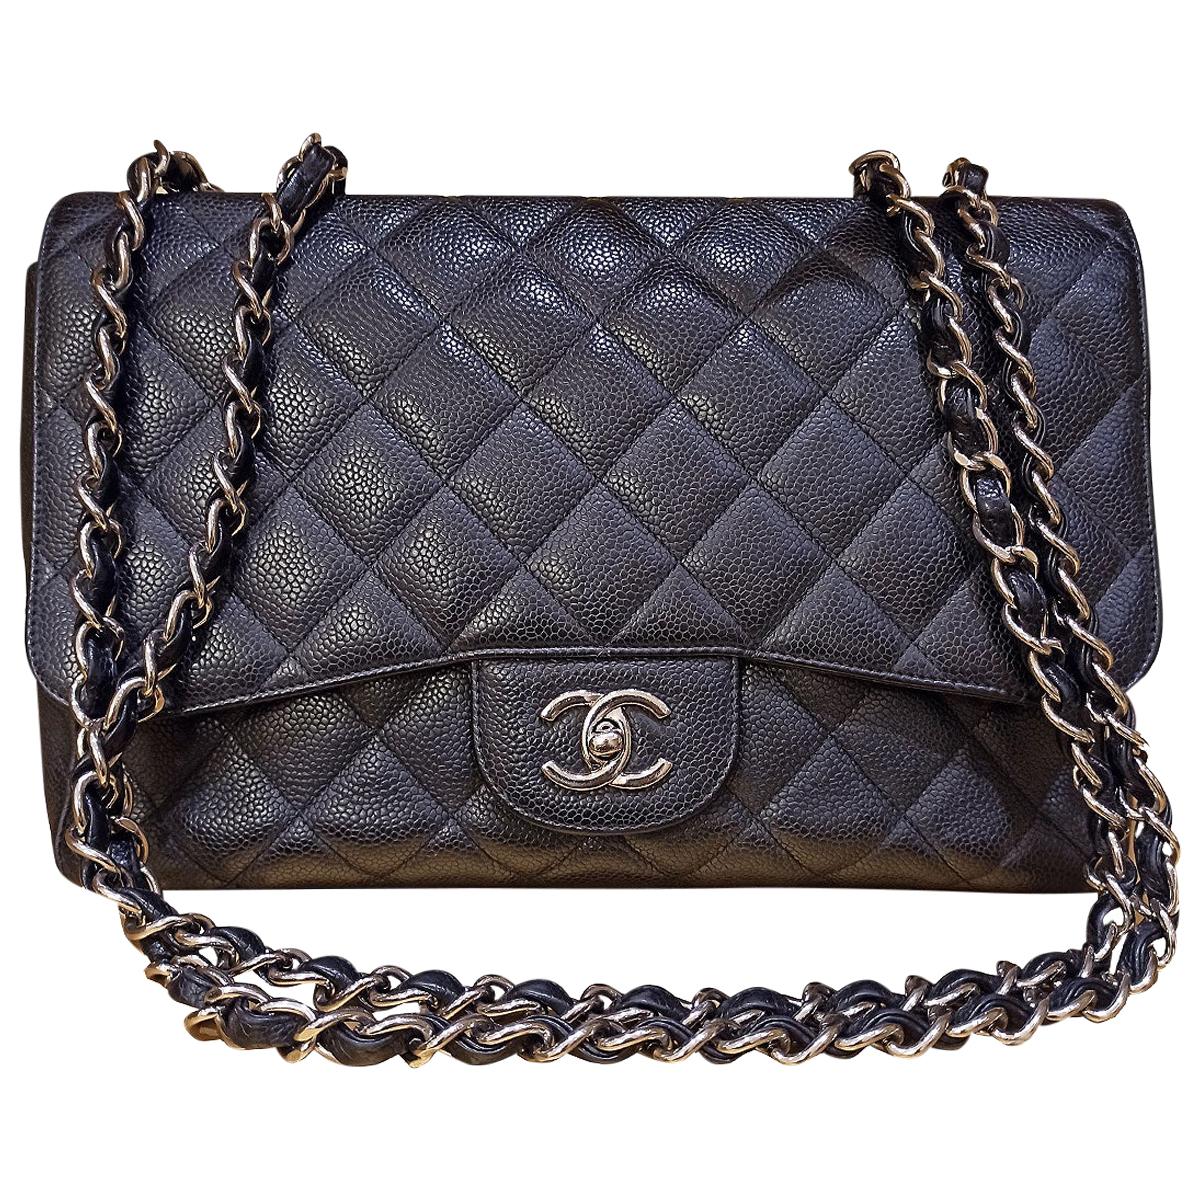 Chanel Black Large Classic Bag For Sale